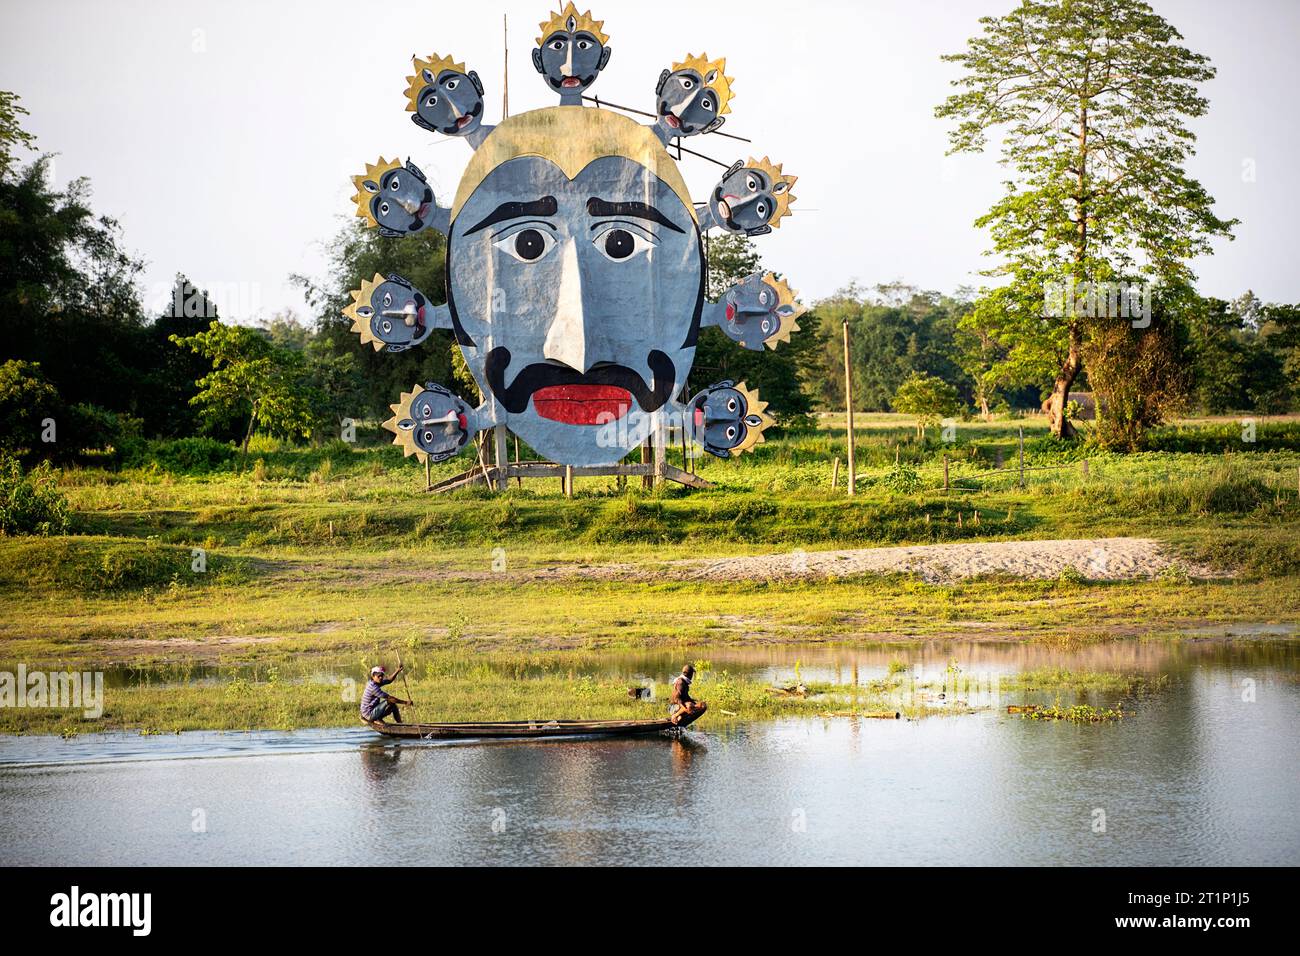 Fisherman paddling in a traditional wooden fishing boat on the river on Majuli island in Assam, passing giant mask on a river bank, India Stock Photo